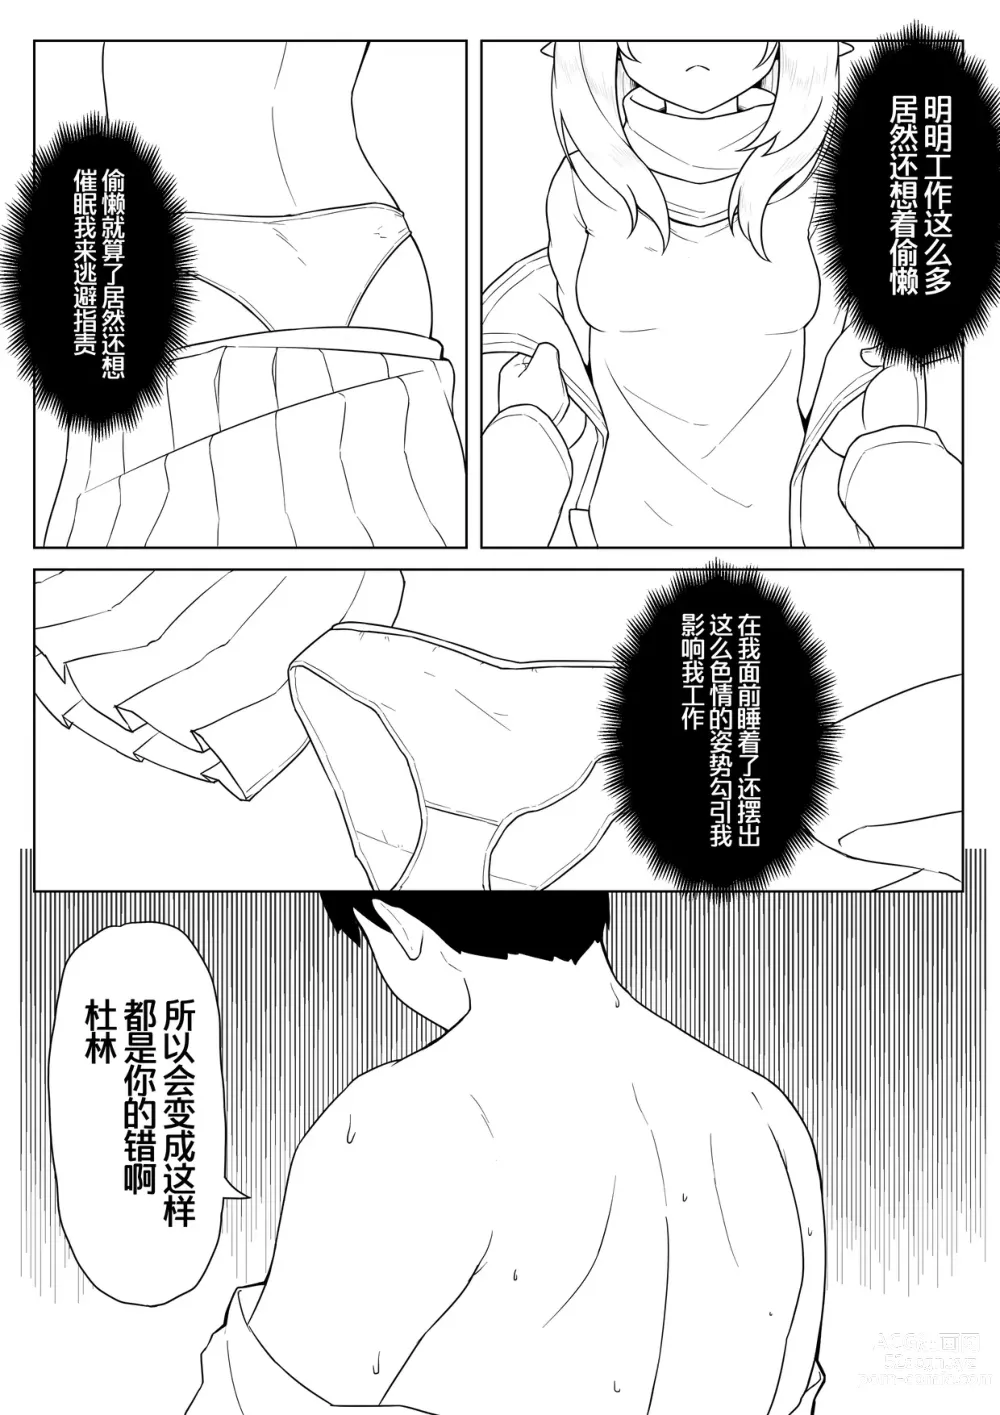 Page 6 of doujinshi Durins Self-hypnosis (decensored)